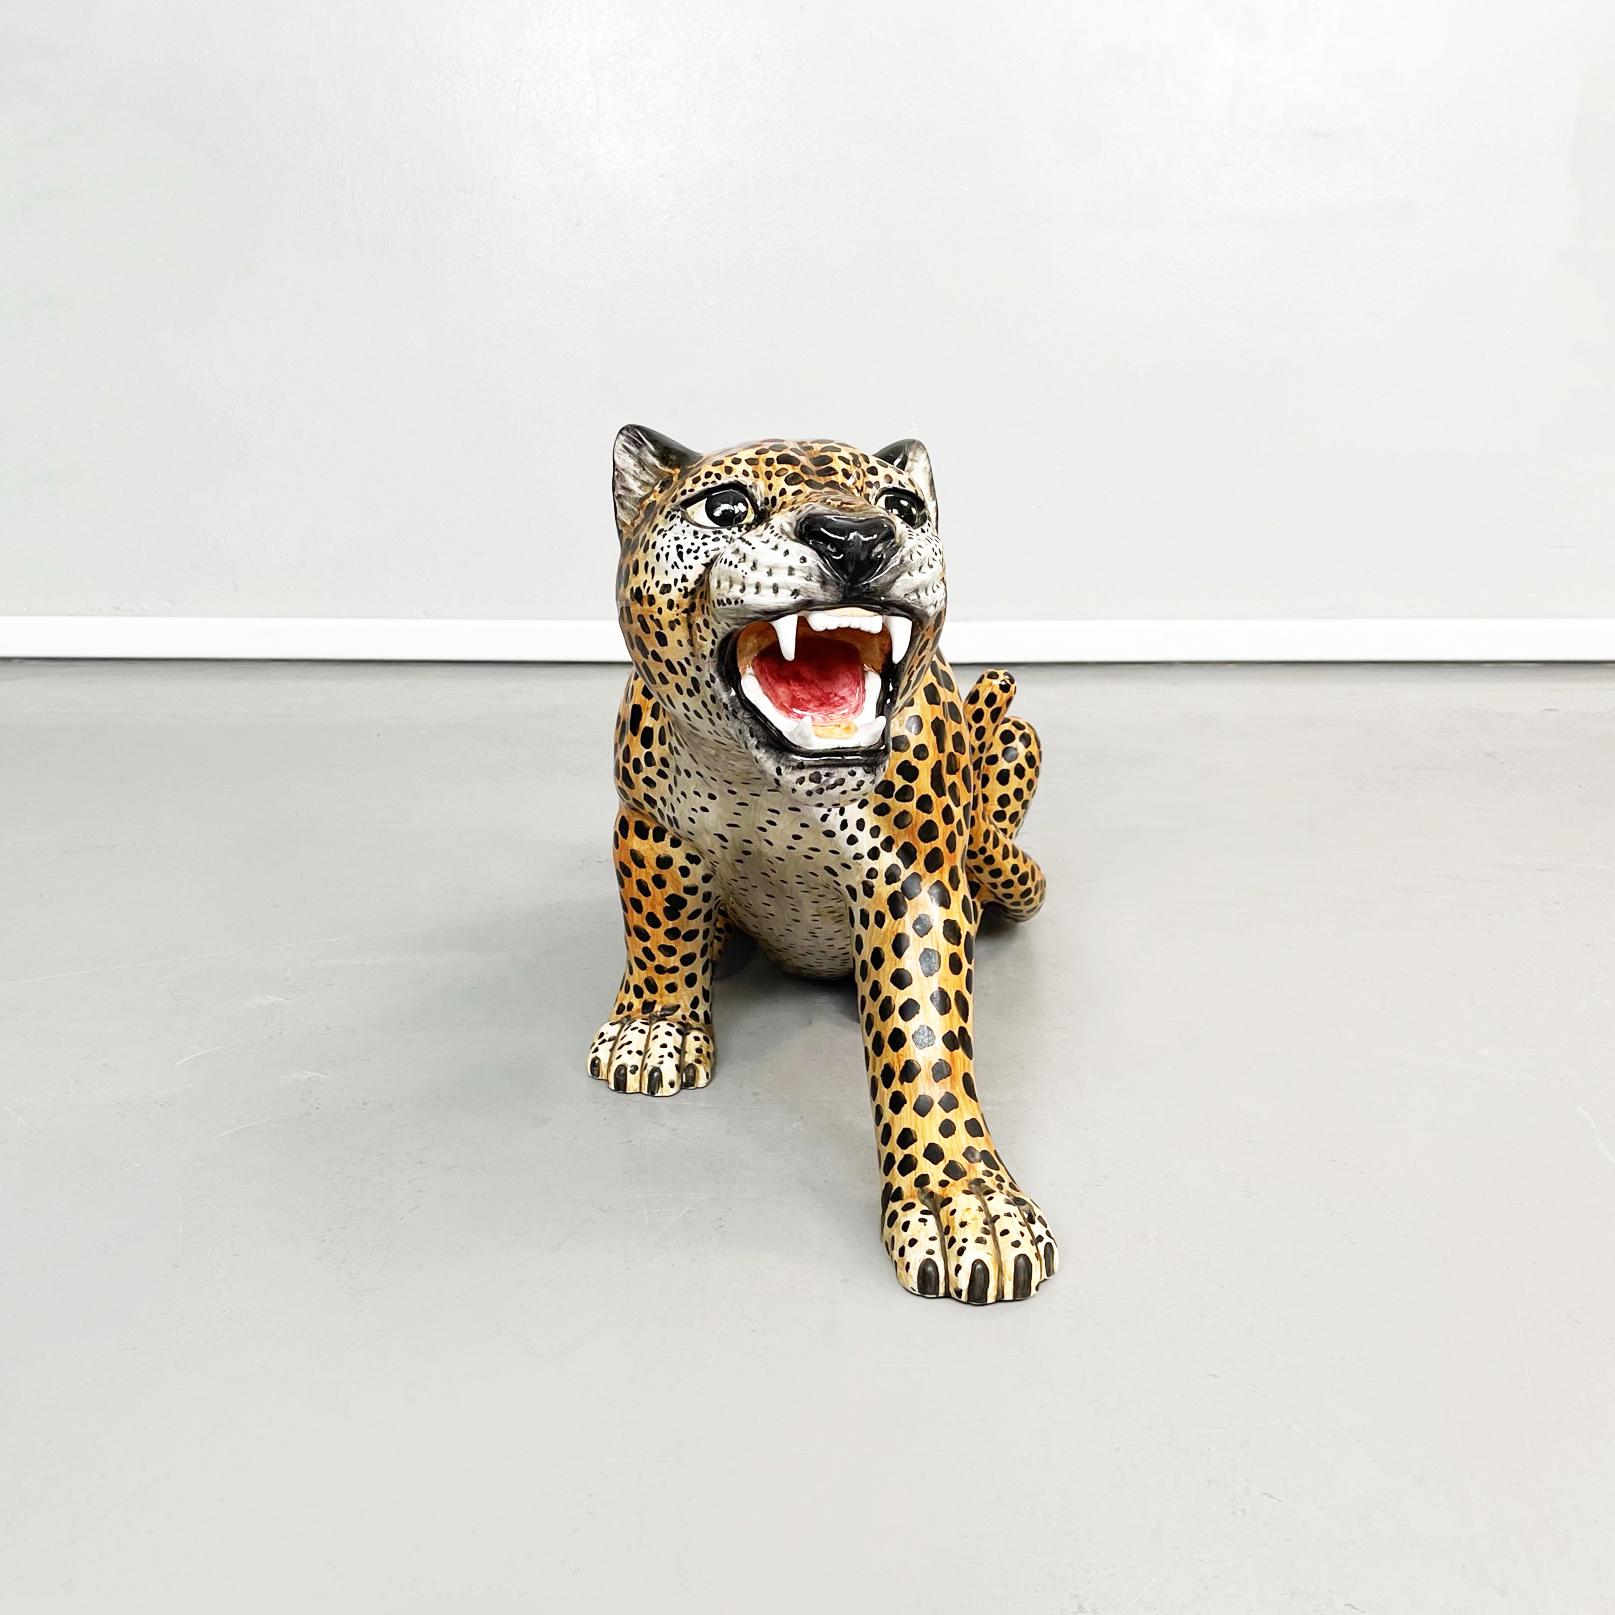 Italian Mid-Century Modern Ceramic statue of a feline animal cheetah, 1960s
Ceramic statue of a cheetah in defense position. The animal has wide open mouth and eyes. Finely crafted and painted.
1960s.
Very good conditions, very slight signs of